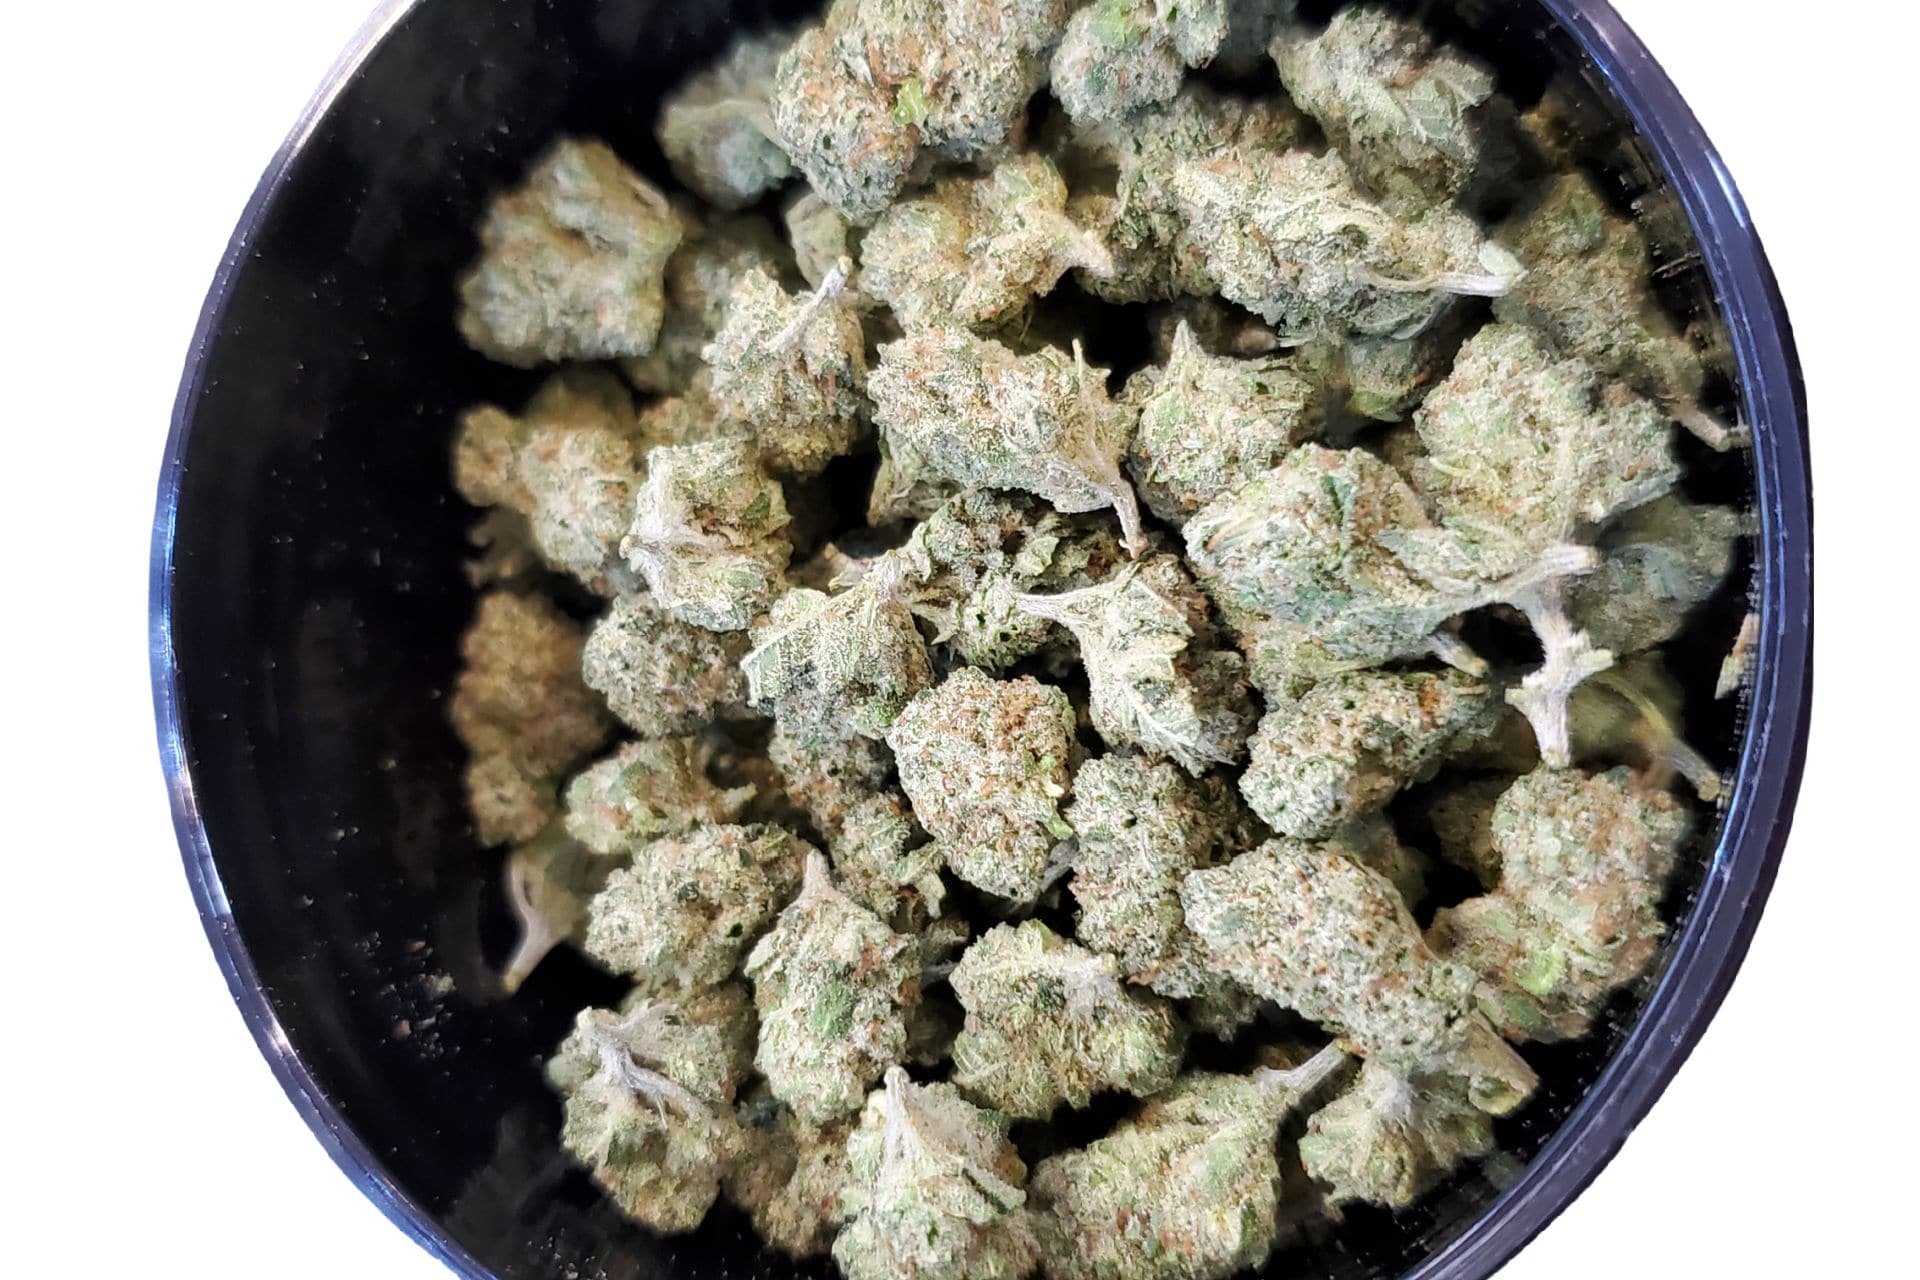 Popcorn buds available at Nature’s Gift Shop medical and recreational dispensary in Pueblo West, Colorado.